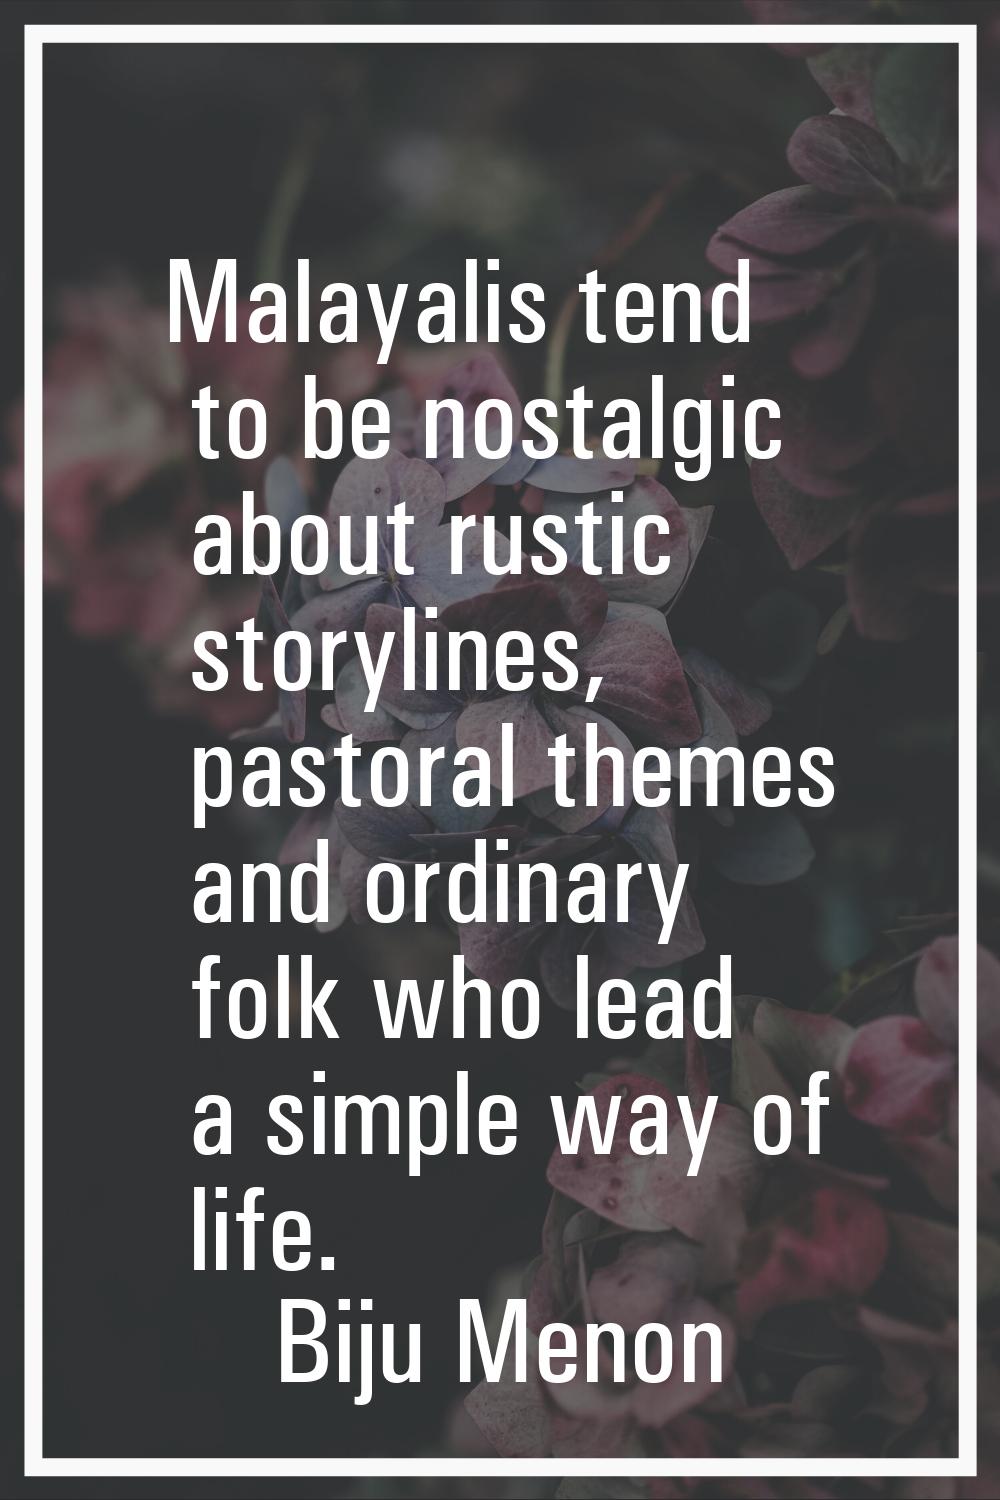 Malayalis tend to be nostalgic about rustic storylines, pastoral themes and ordinary folk who lead 